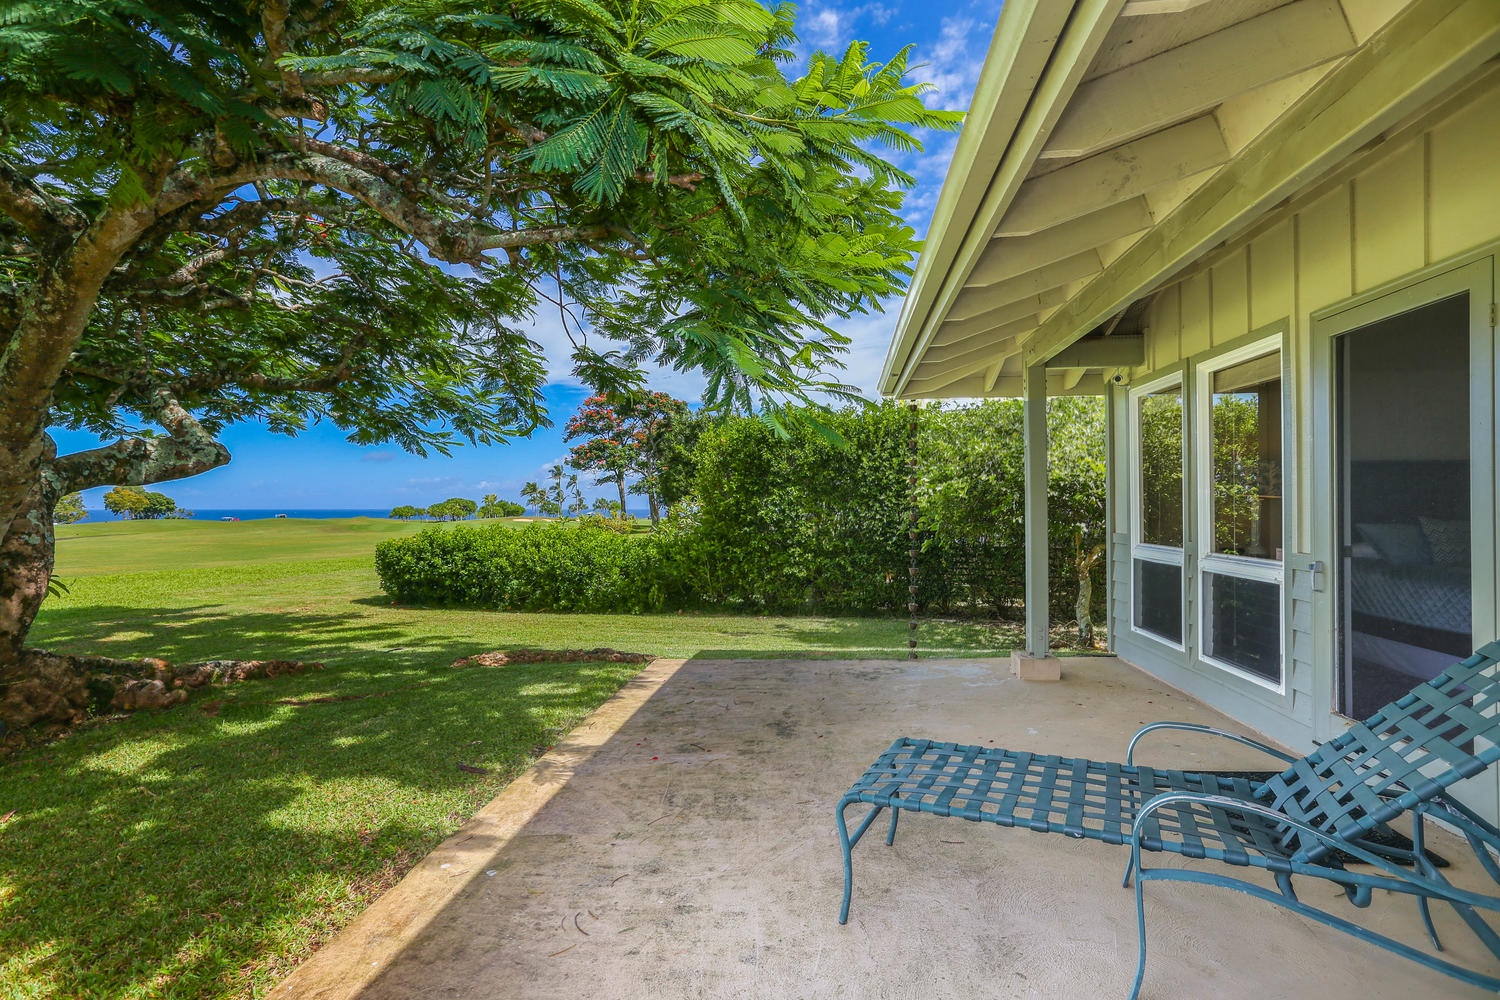 Princeville Vacation Rentals, Half Moon Hana - Relaxing space with views